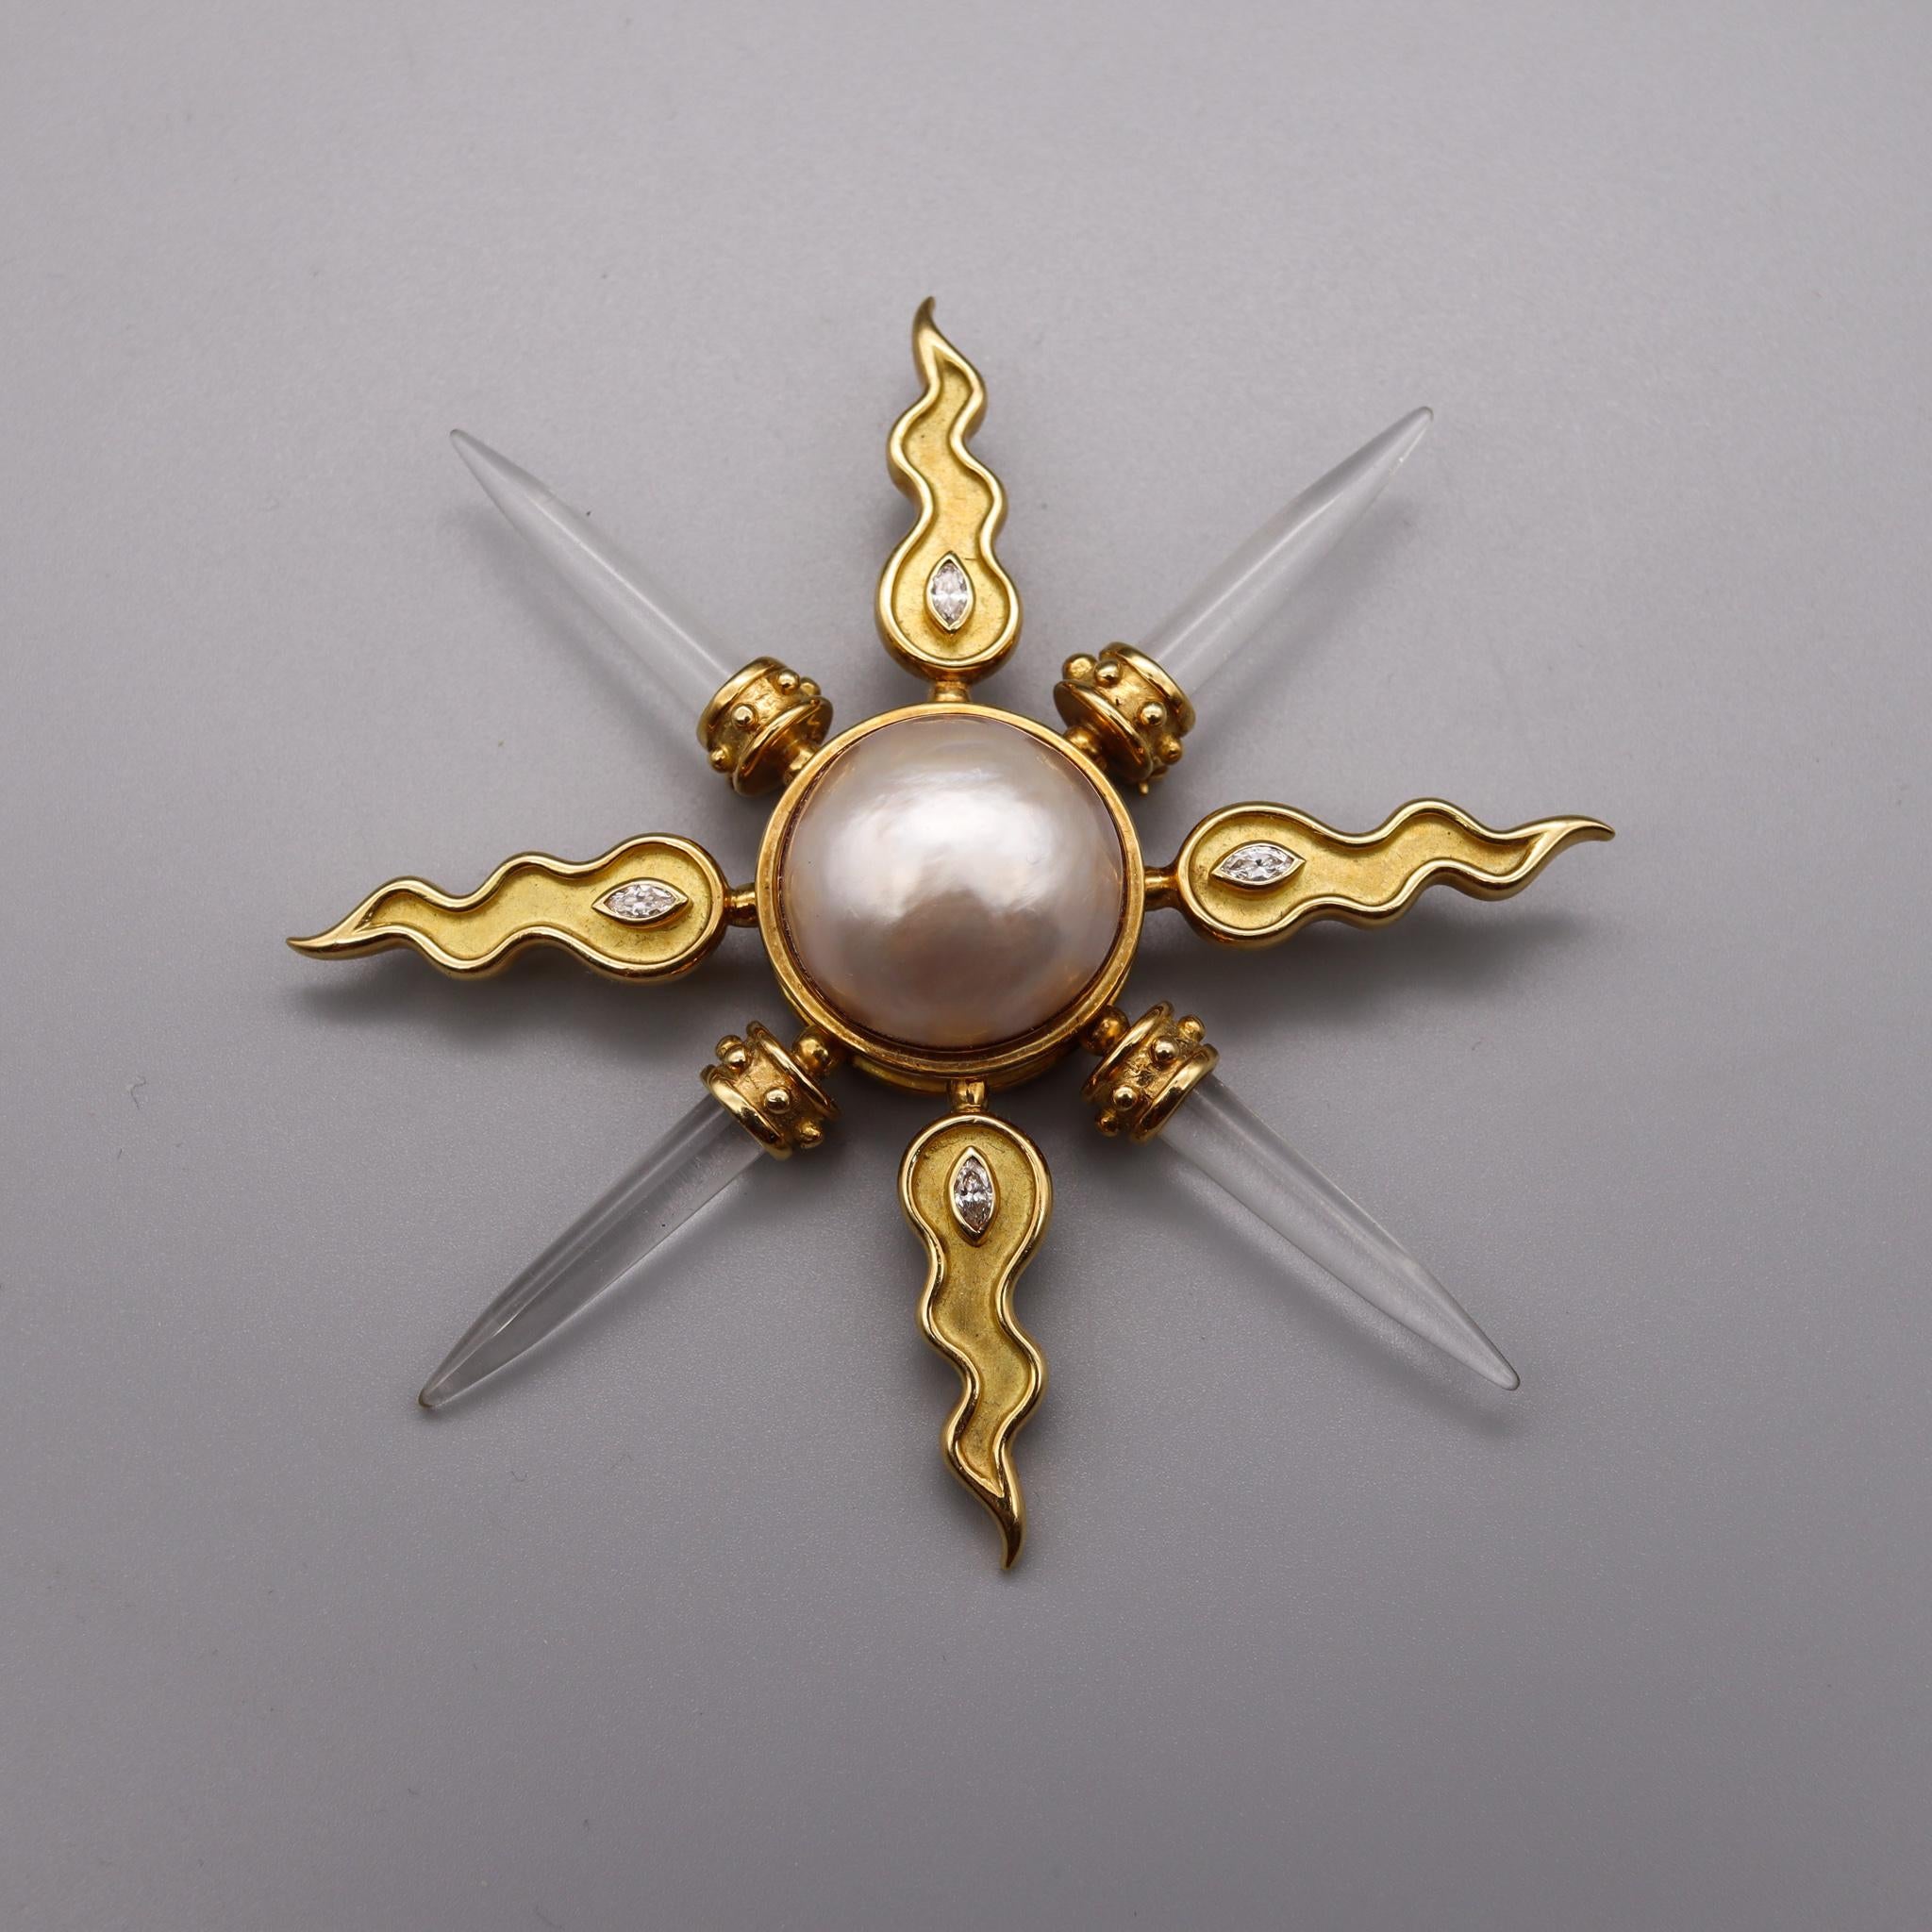 Exceptional modernist spikes pendant-brooch.

A contemporary statement piece crafted in the shape of a Maltese cross in solid 18 karats of textured yellow gold. Is suited at the reverse with a horizontal hinged pin bar, with a lock. This can be used